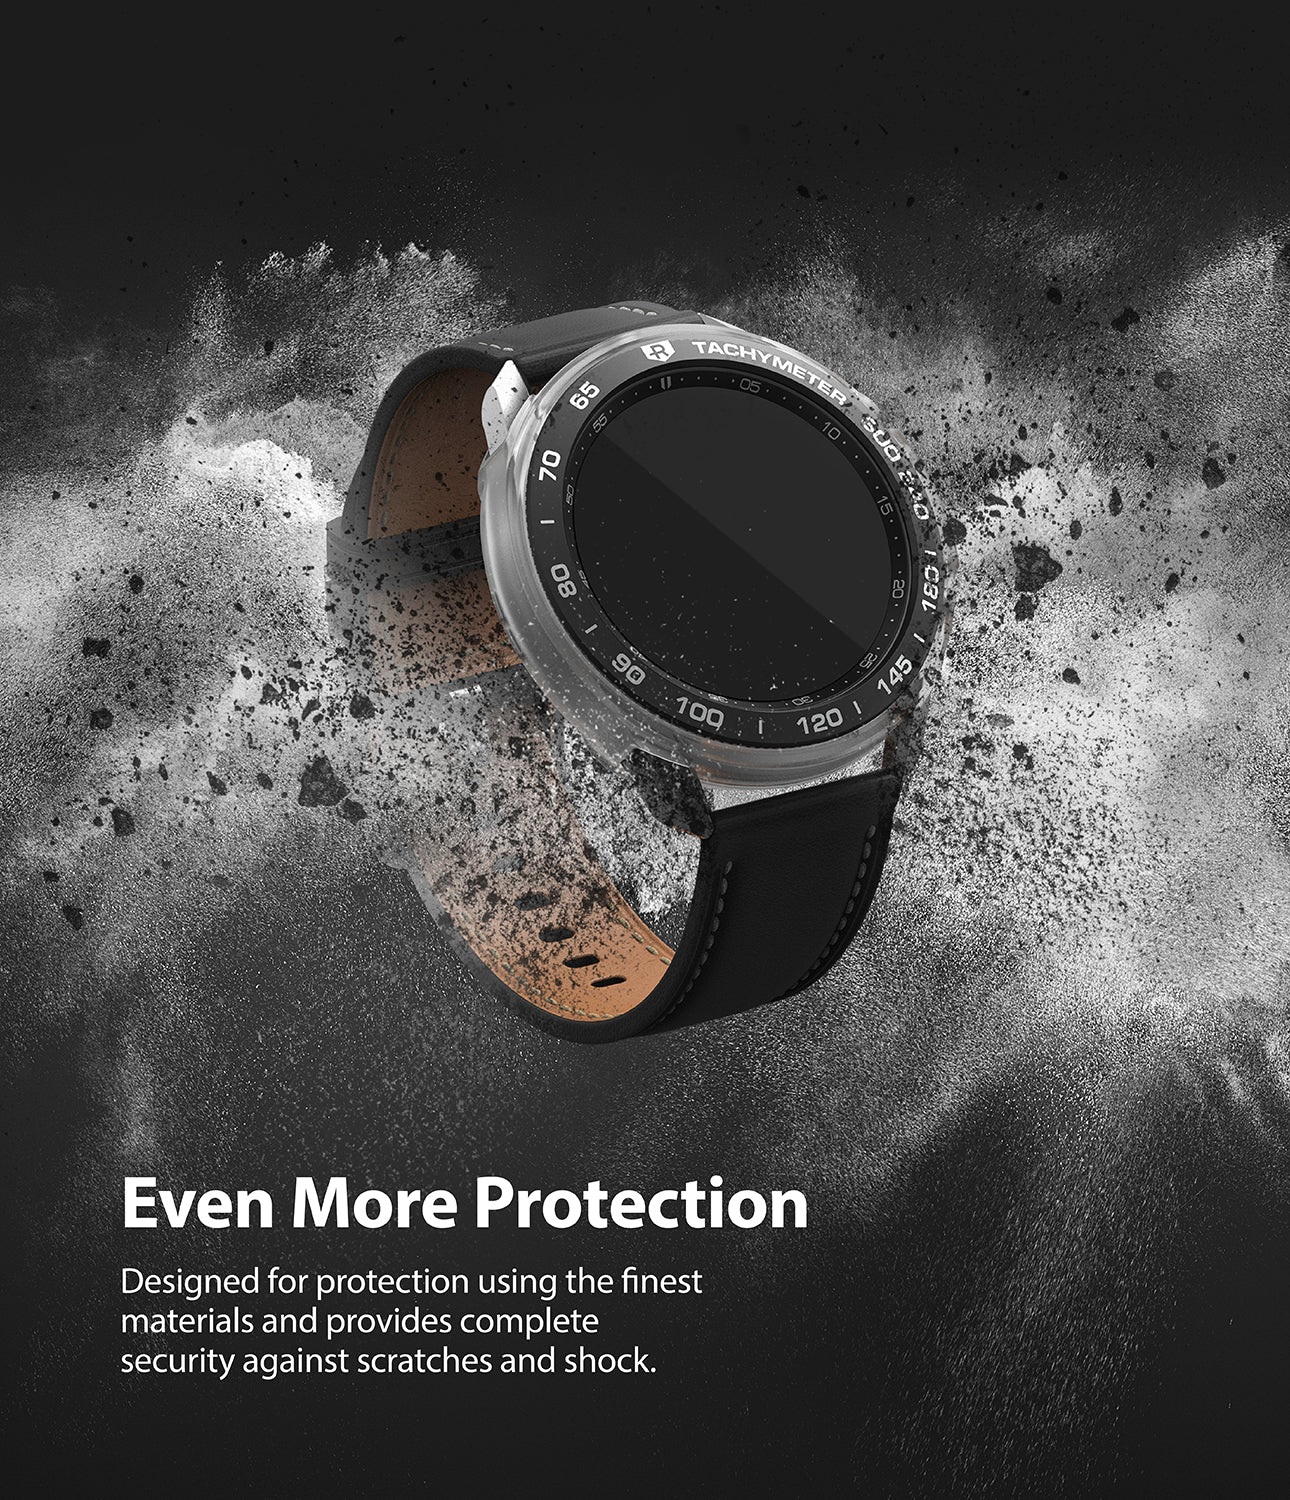 designed for proetction using the finest materials and provides complete security against scratches and shock